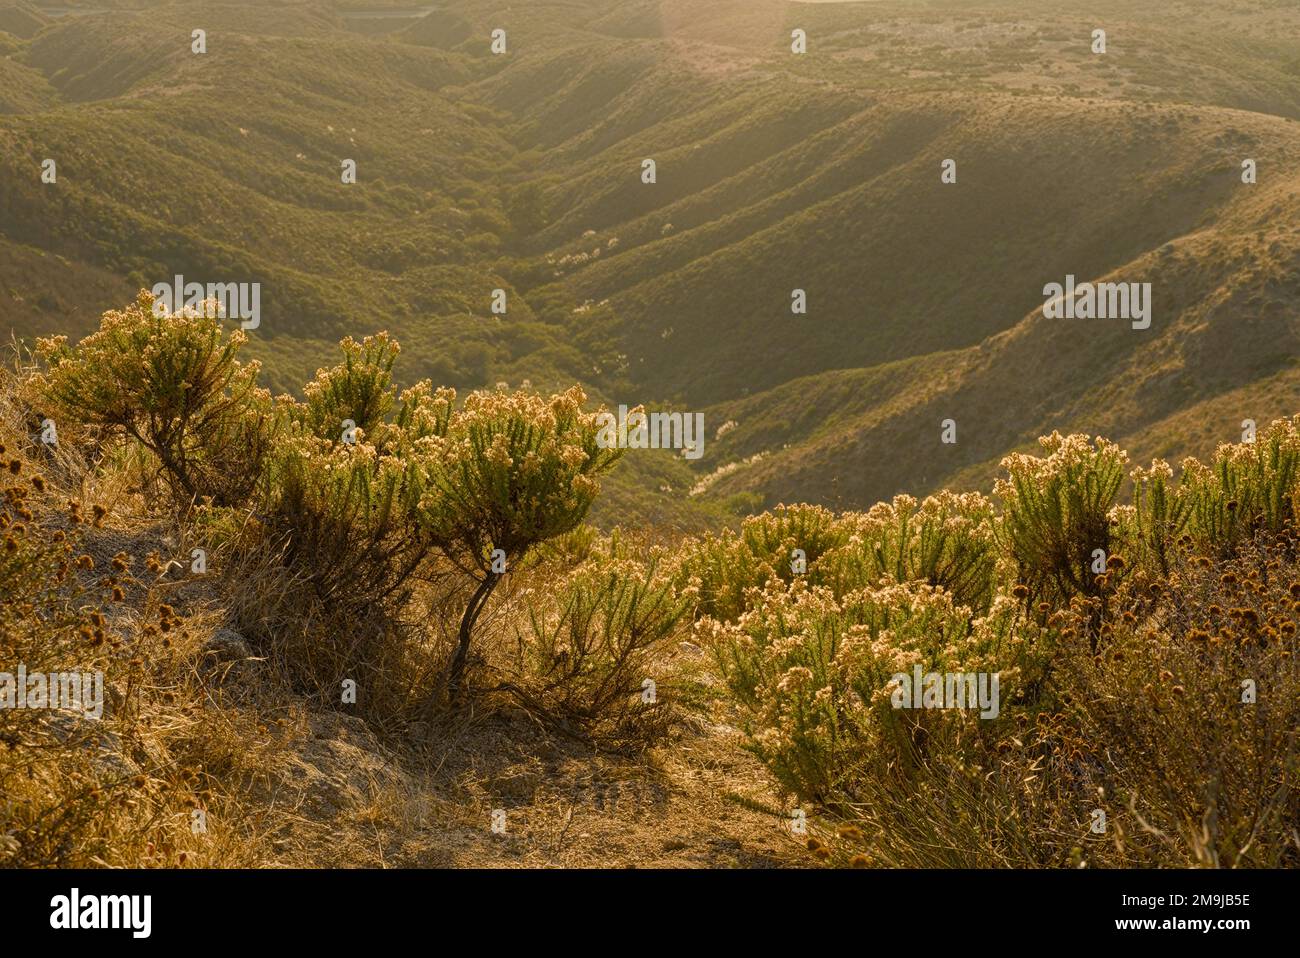 Valley and rubber rabbitbrush plant in the afternoon golden sun light. Stock Photo